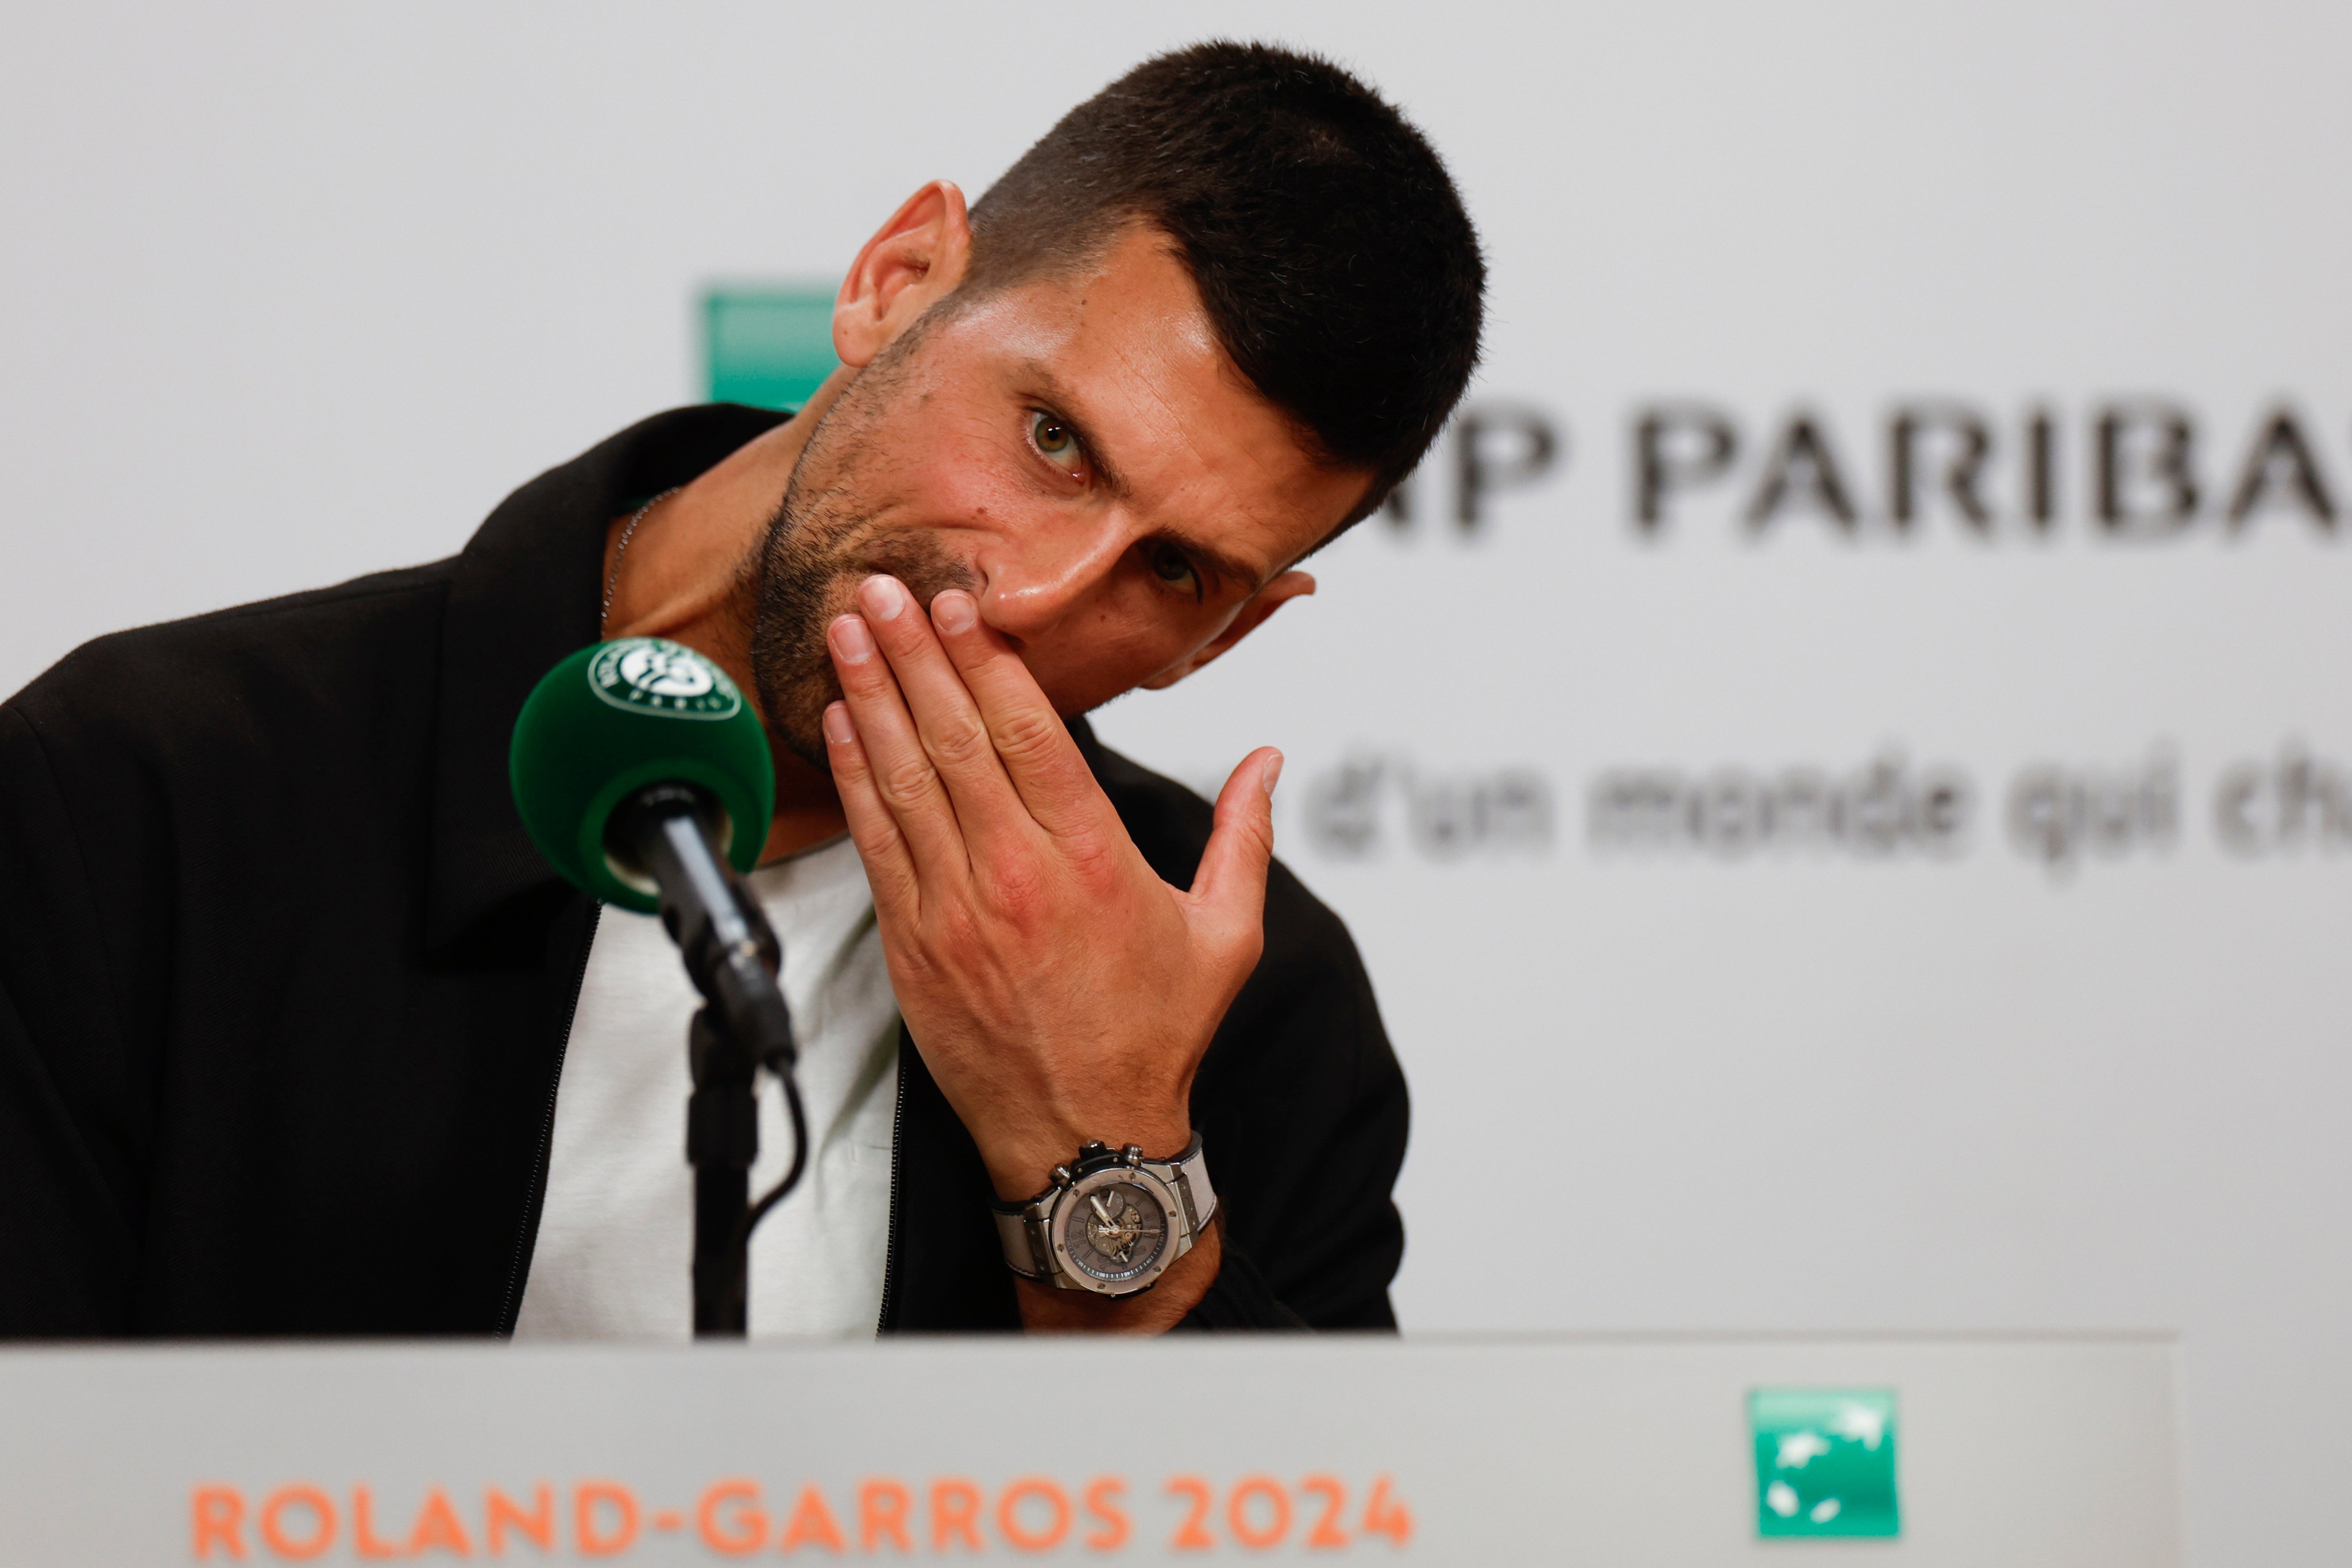 Serbia’s Novak Djokovic, seen here pondering a question at a press conference, says “I know exactly what I need to do in a grand slam environment”. Photo: AP